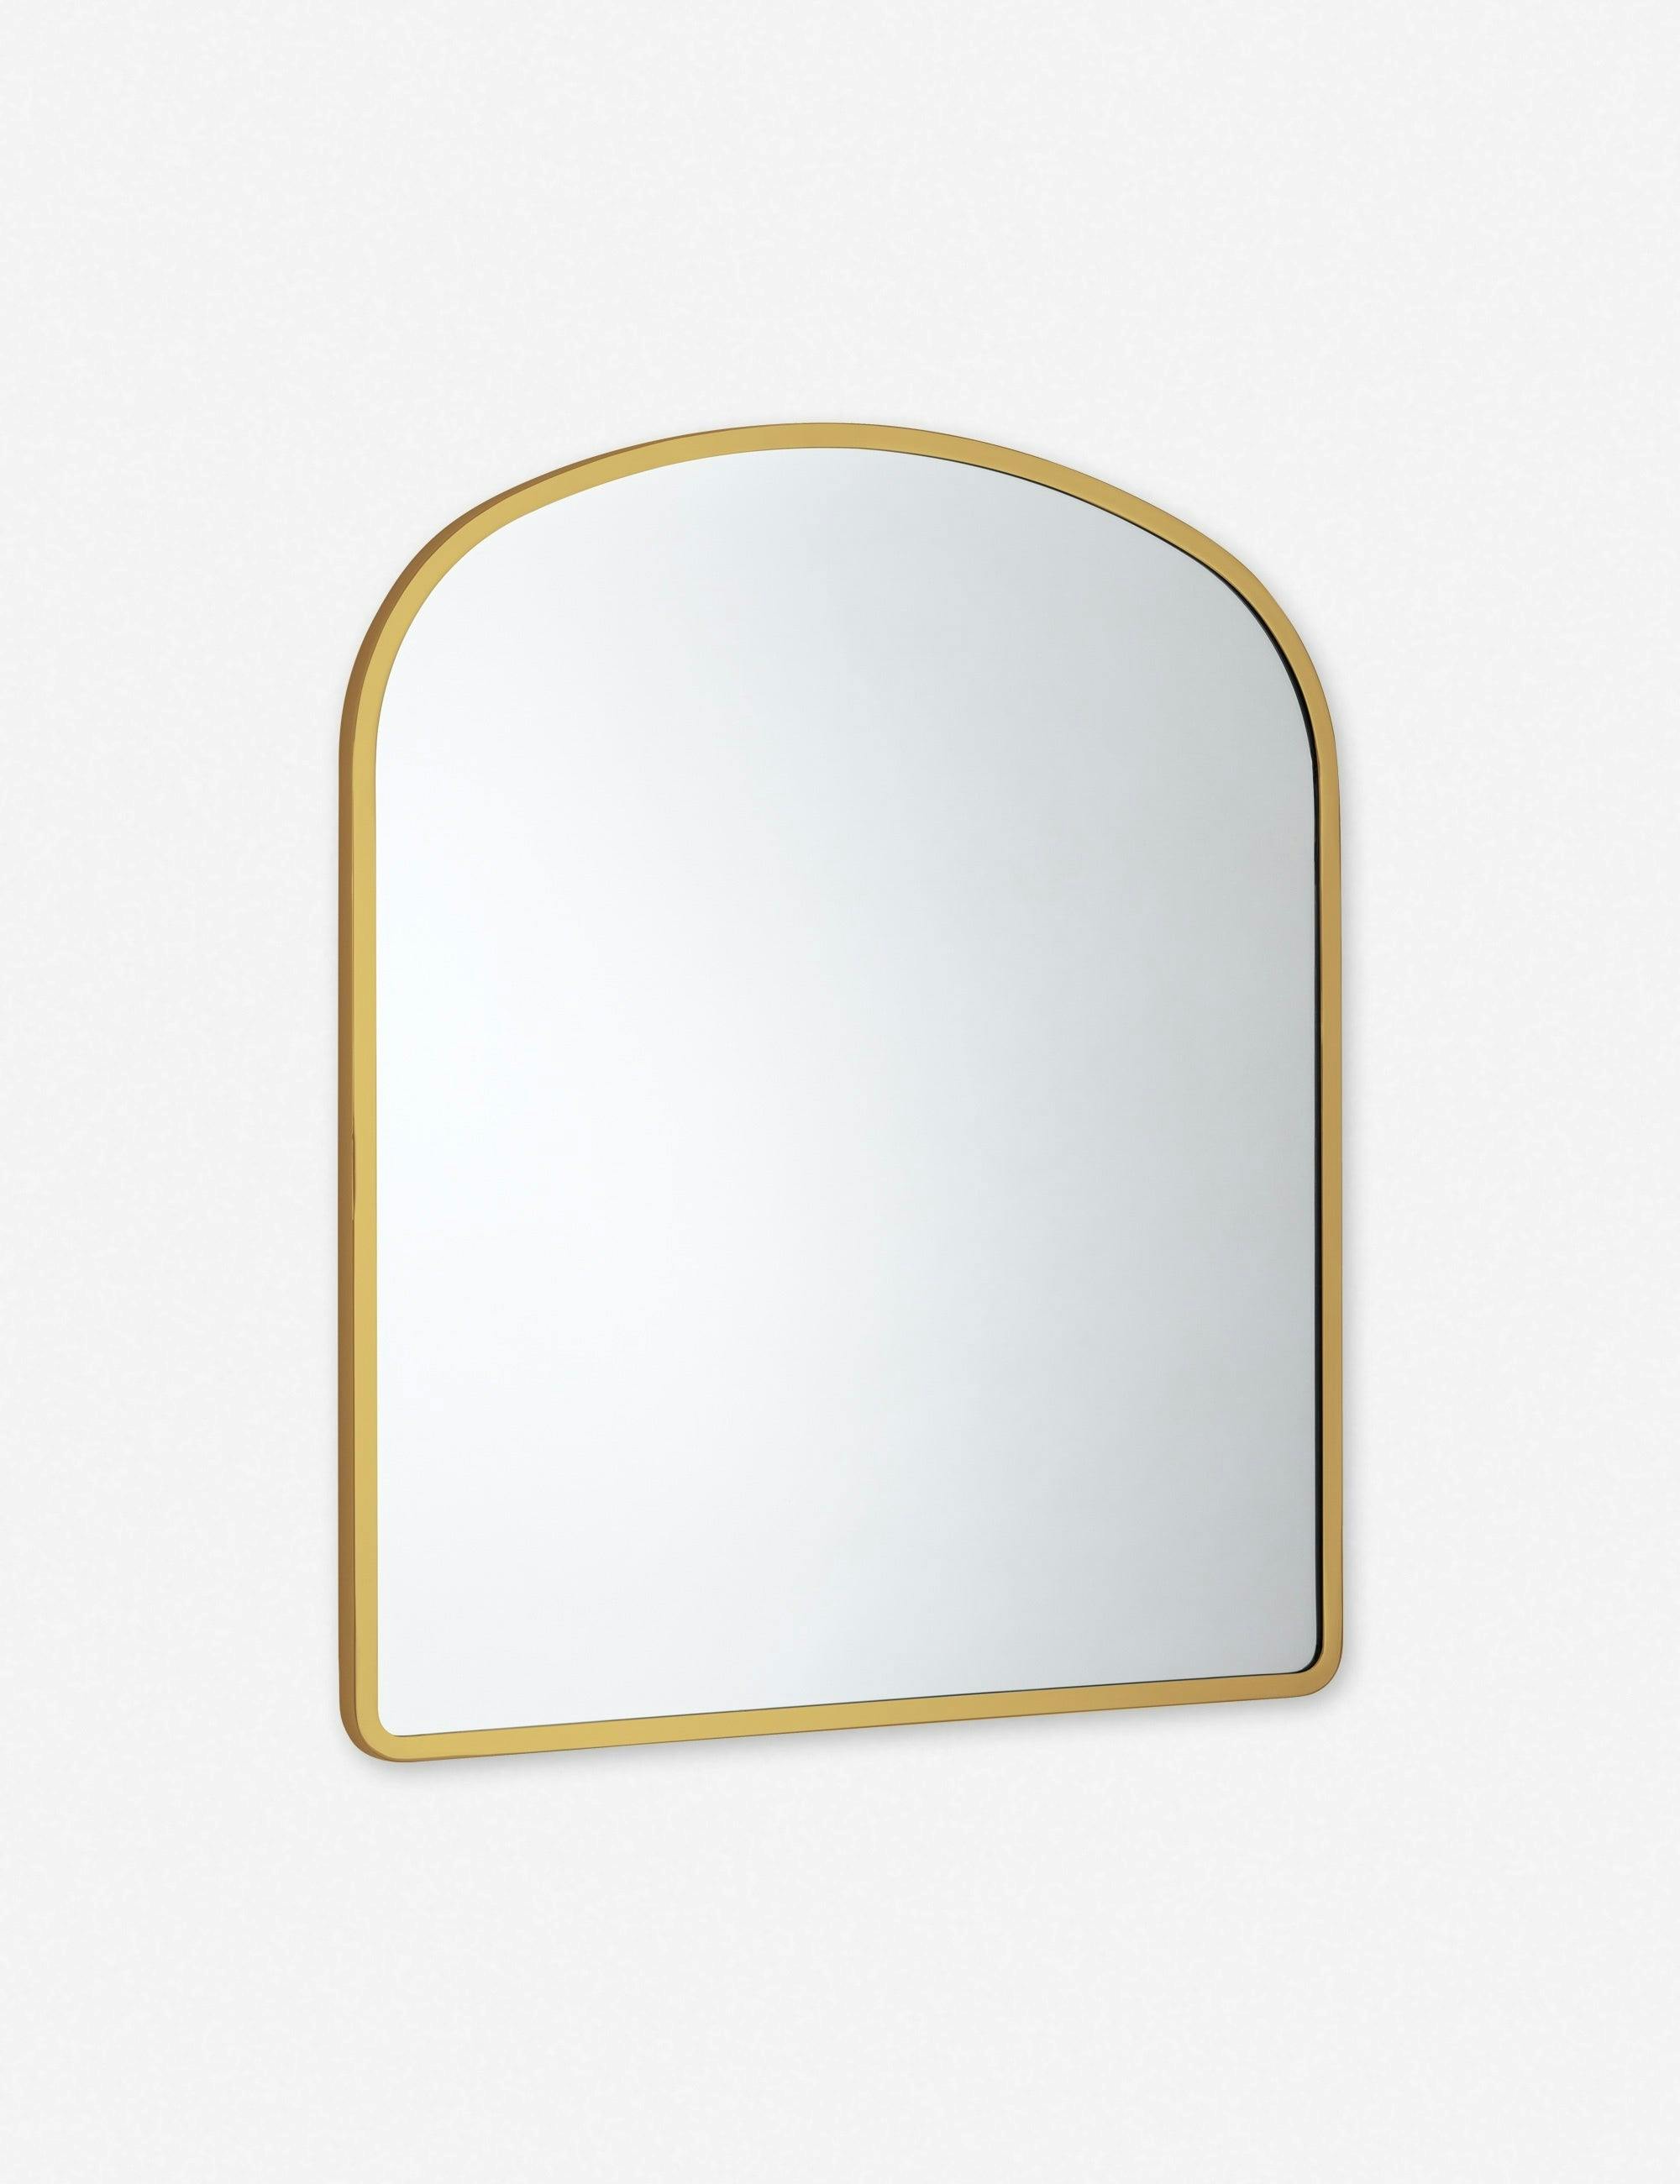 Arched Brass Frame Wall Mirror for Bathroom, Entryway, or Bedroom